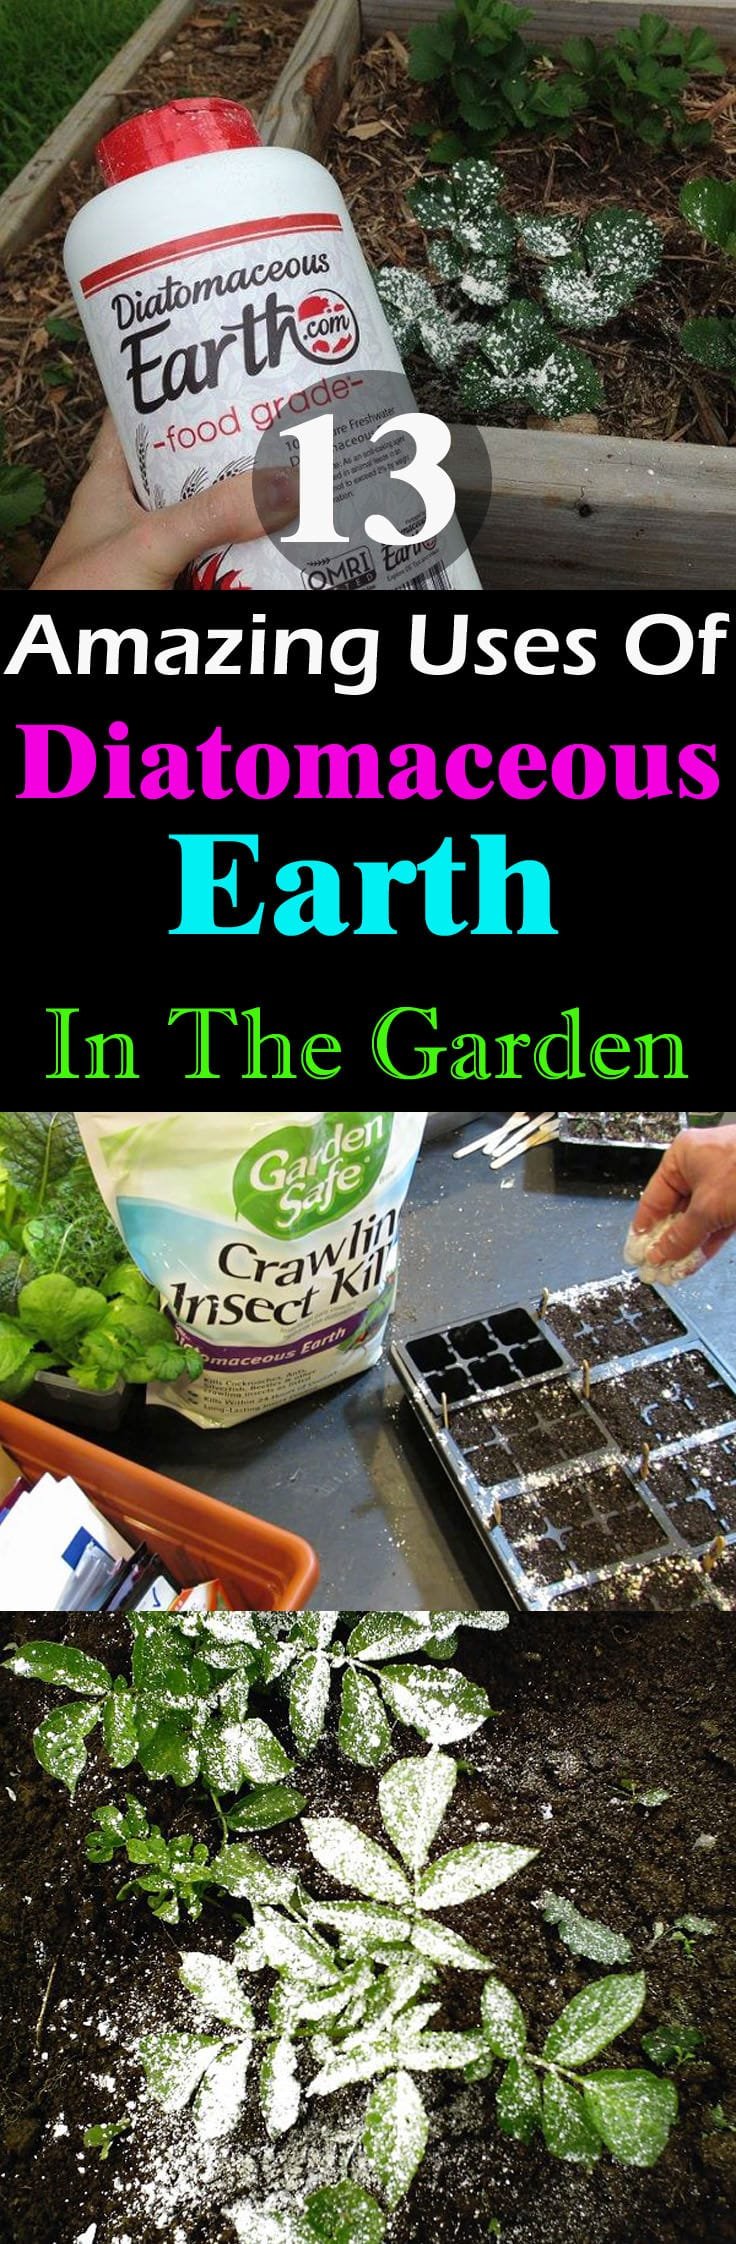 This naturally occurring substance can be used for so many things in the garden. Must check out these 13 Diatomaceous Earth Uses to learn more!